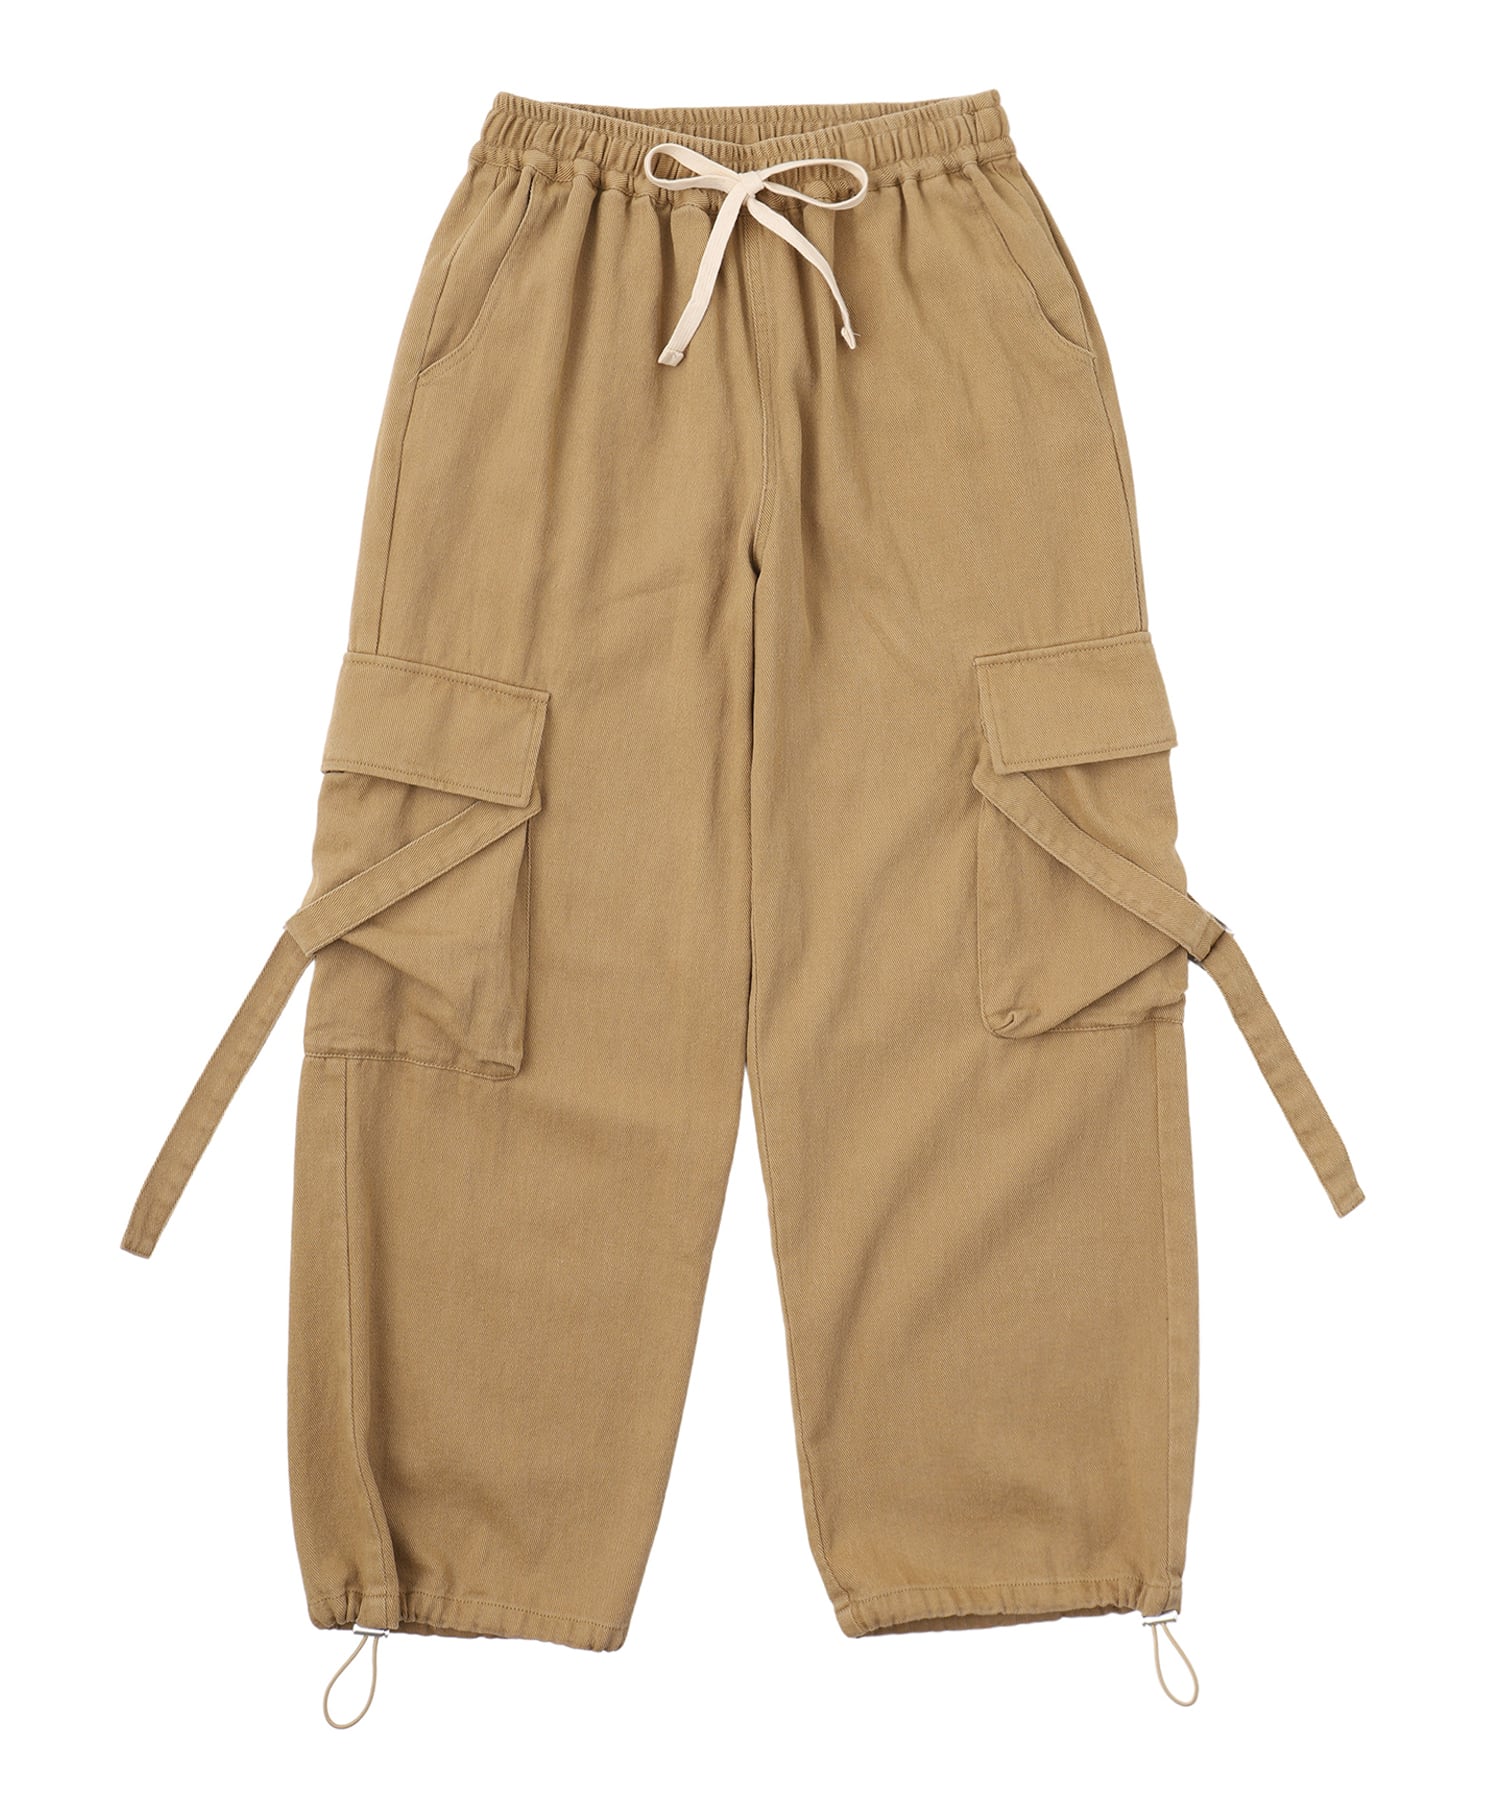 Drost military wide pants